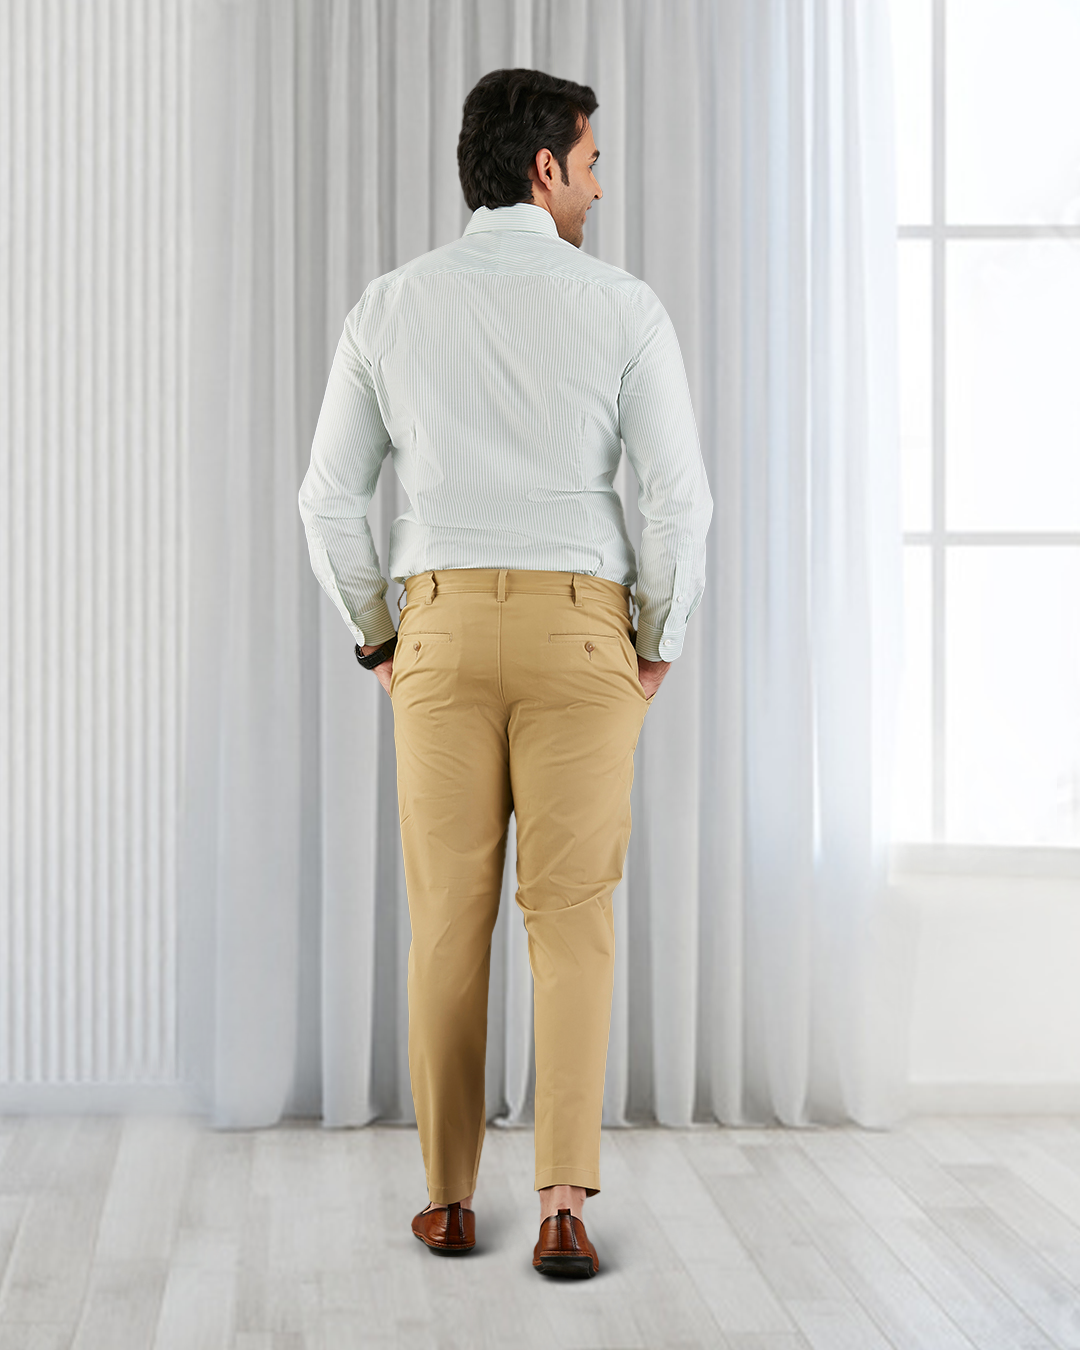 Back view of custom Genoa Chino pants for men by Luxire in khaki hands in pockets